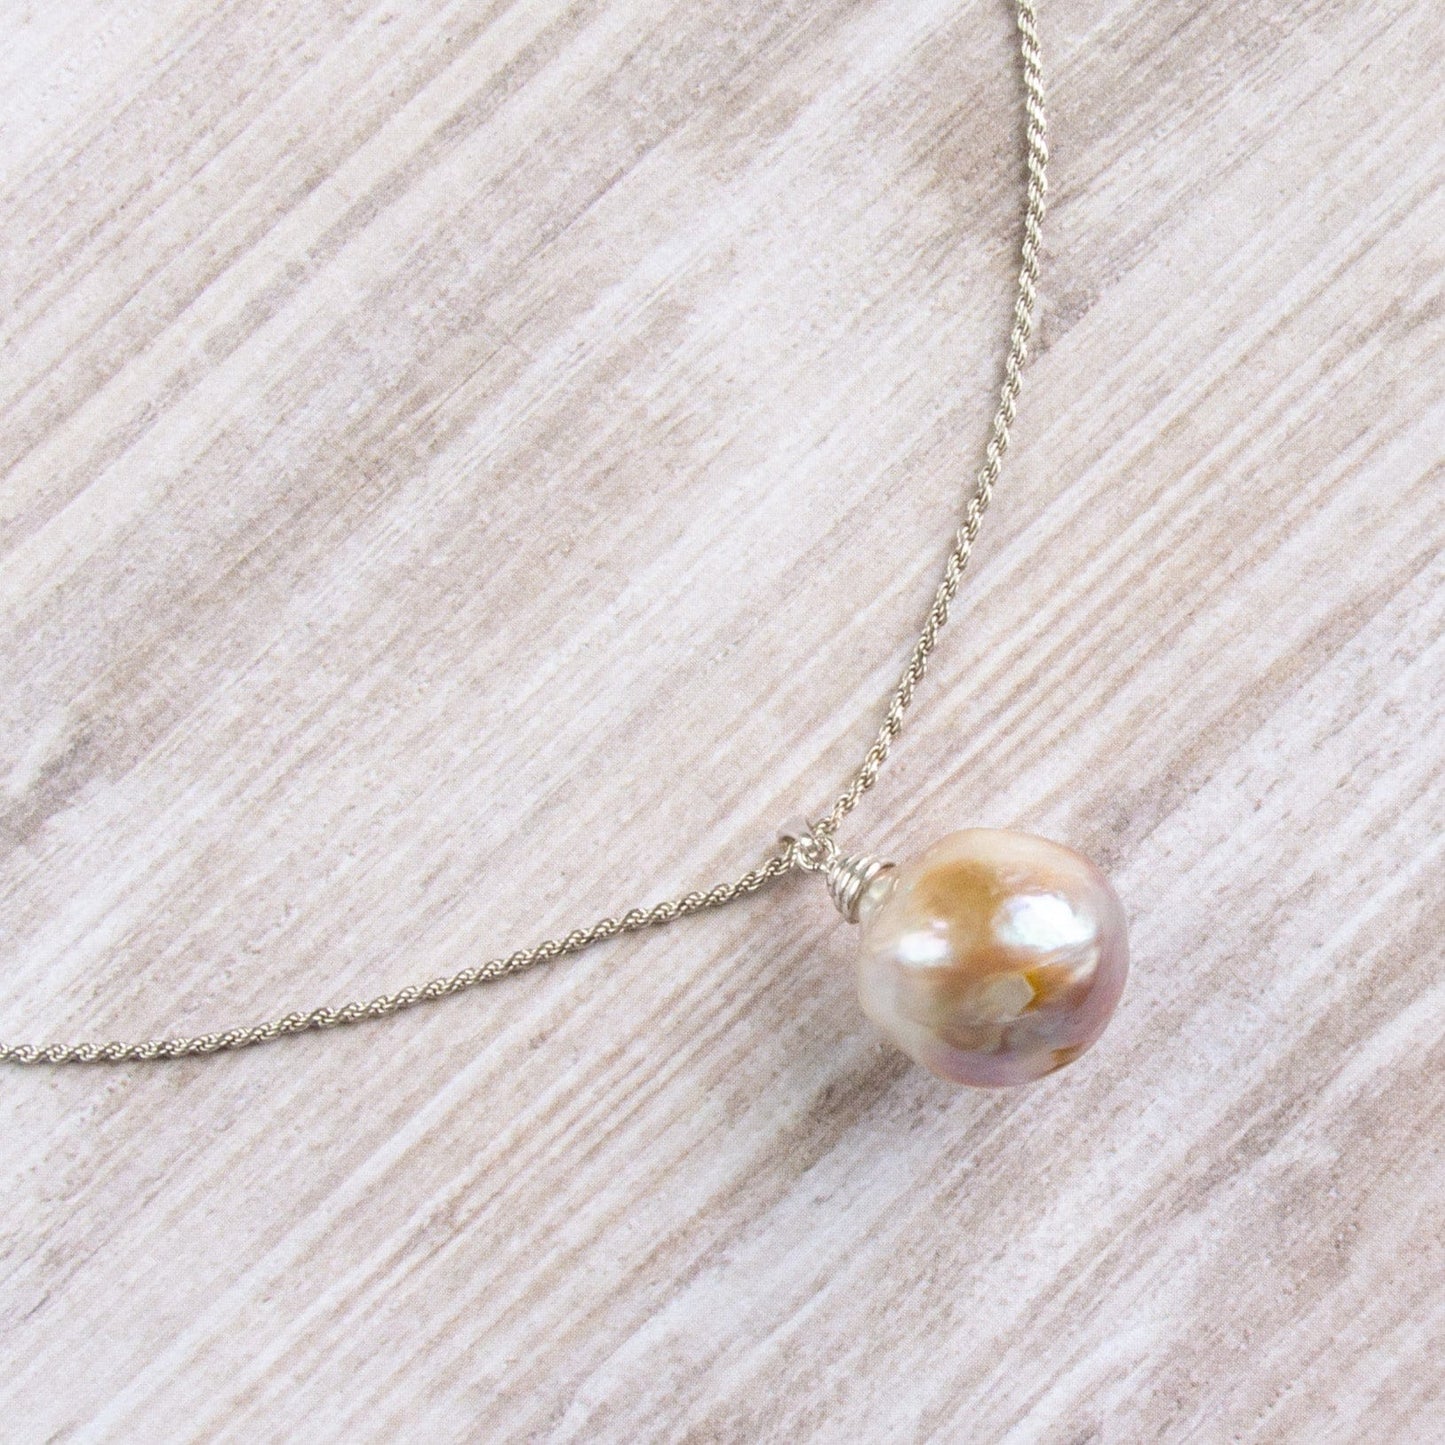 Handcrafted Large Freshwater Baroque Pearl Silver Necklace